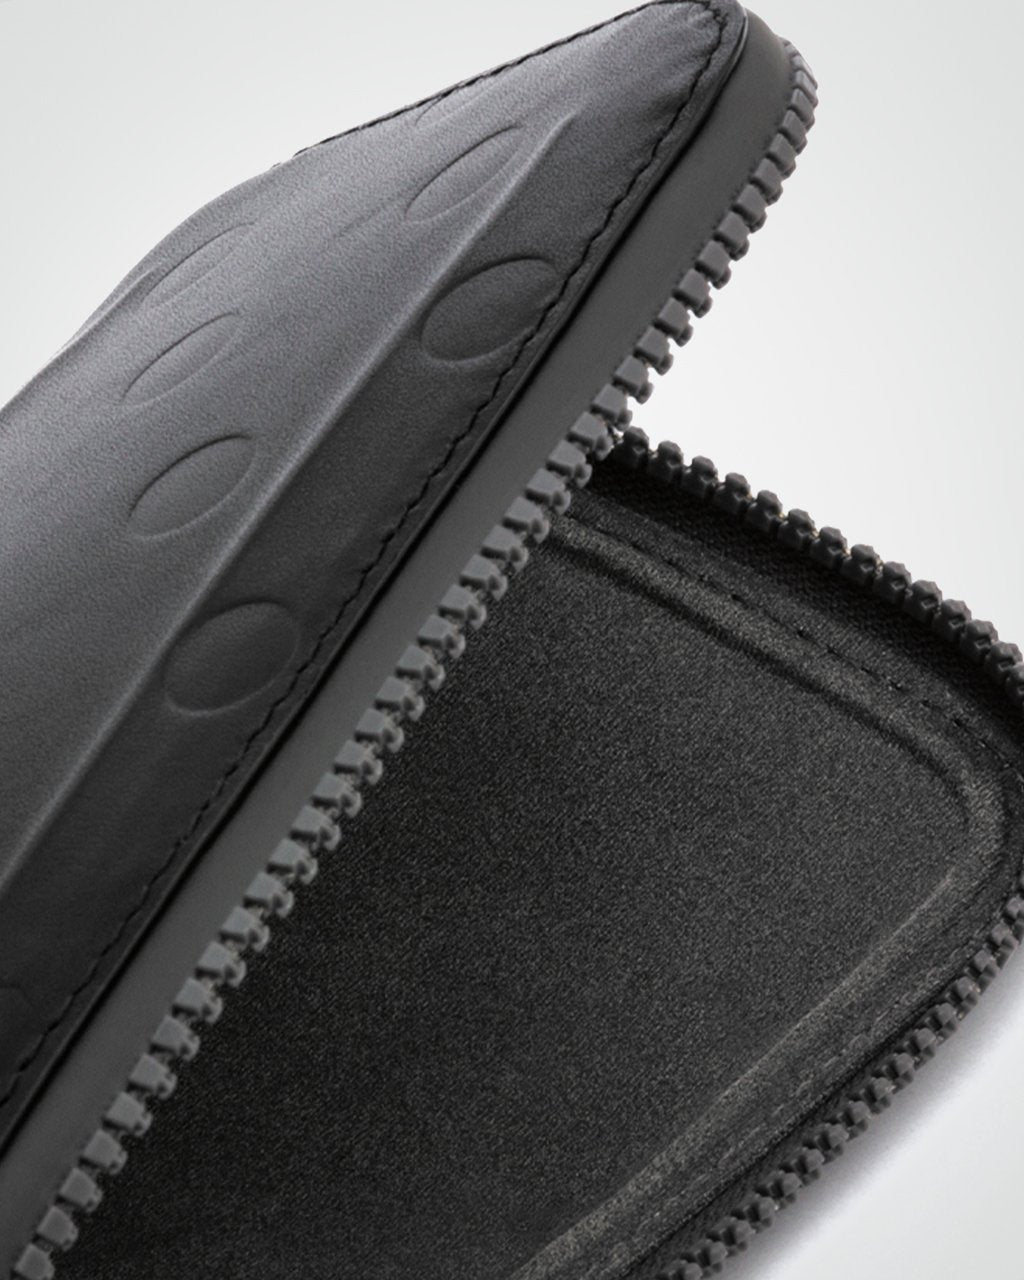 MAAP x Bellroy All-Conditions Phone Pocket - MAAP Cycling Apparel